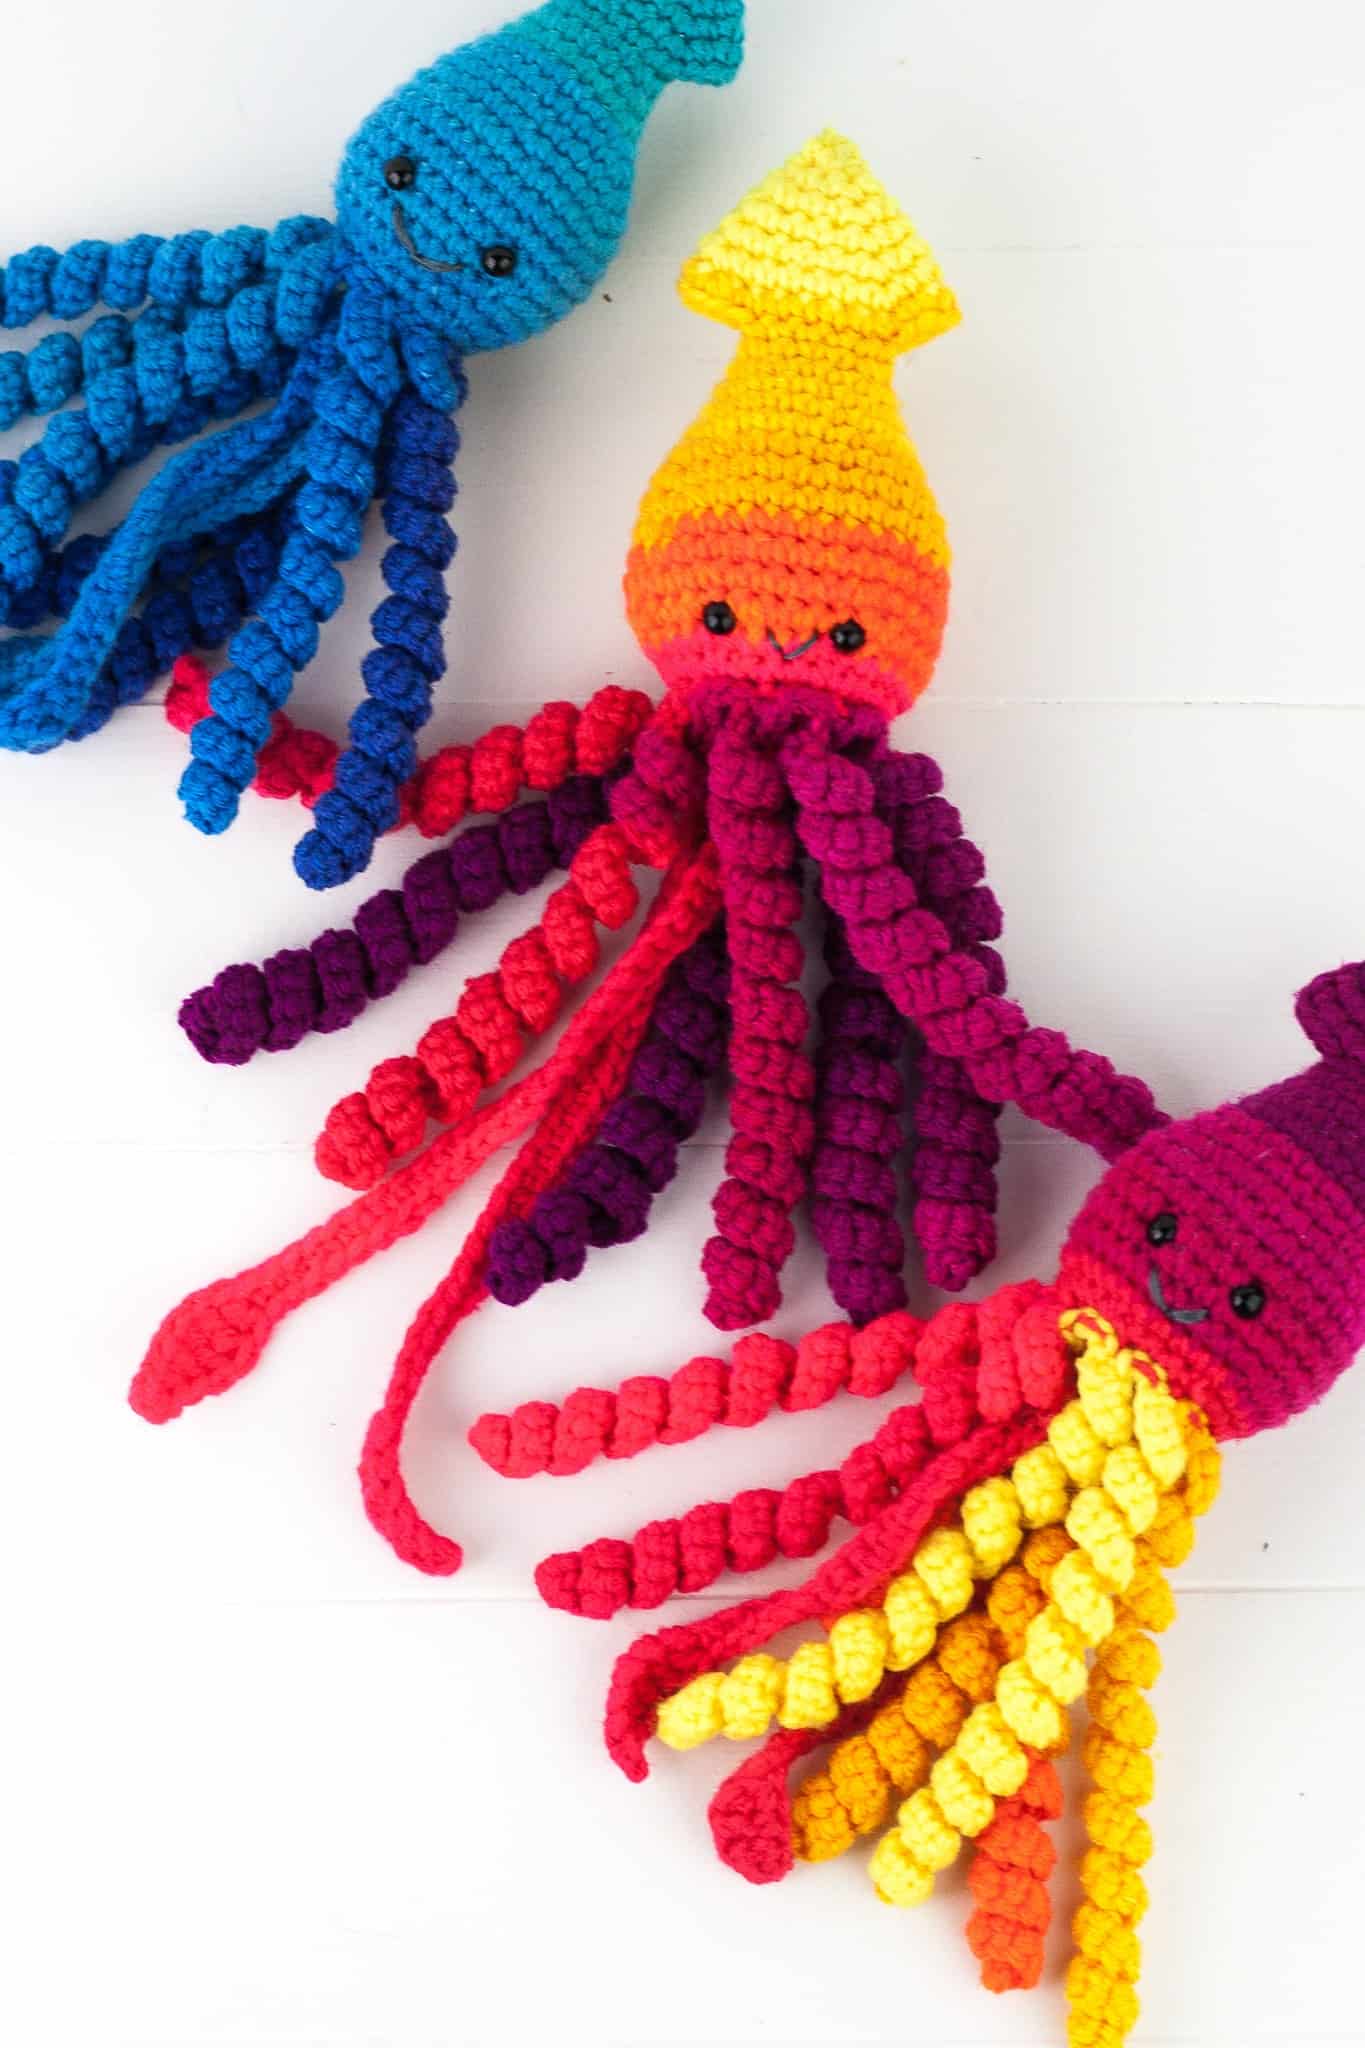 12 Free Crochet Patterns For Stuffed Animals You Can Donate To Pediatric  Hospitals - Create To Donate